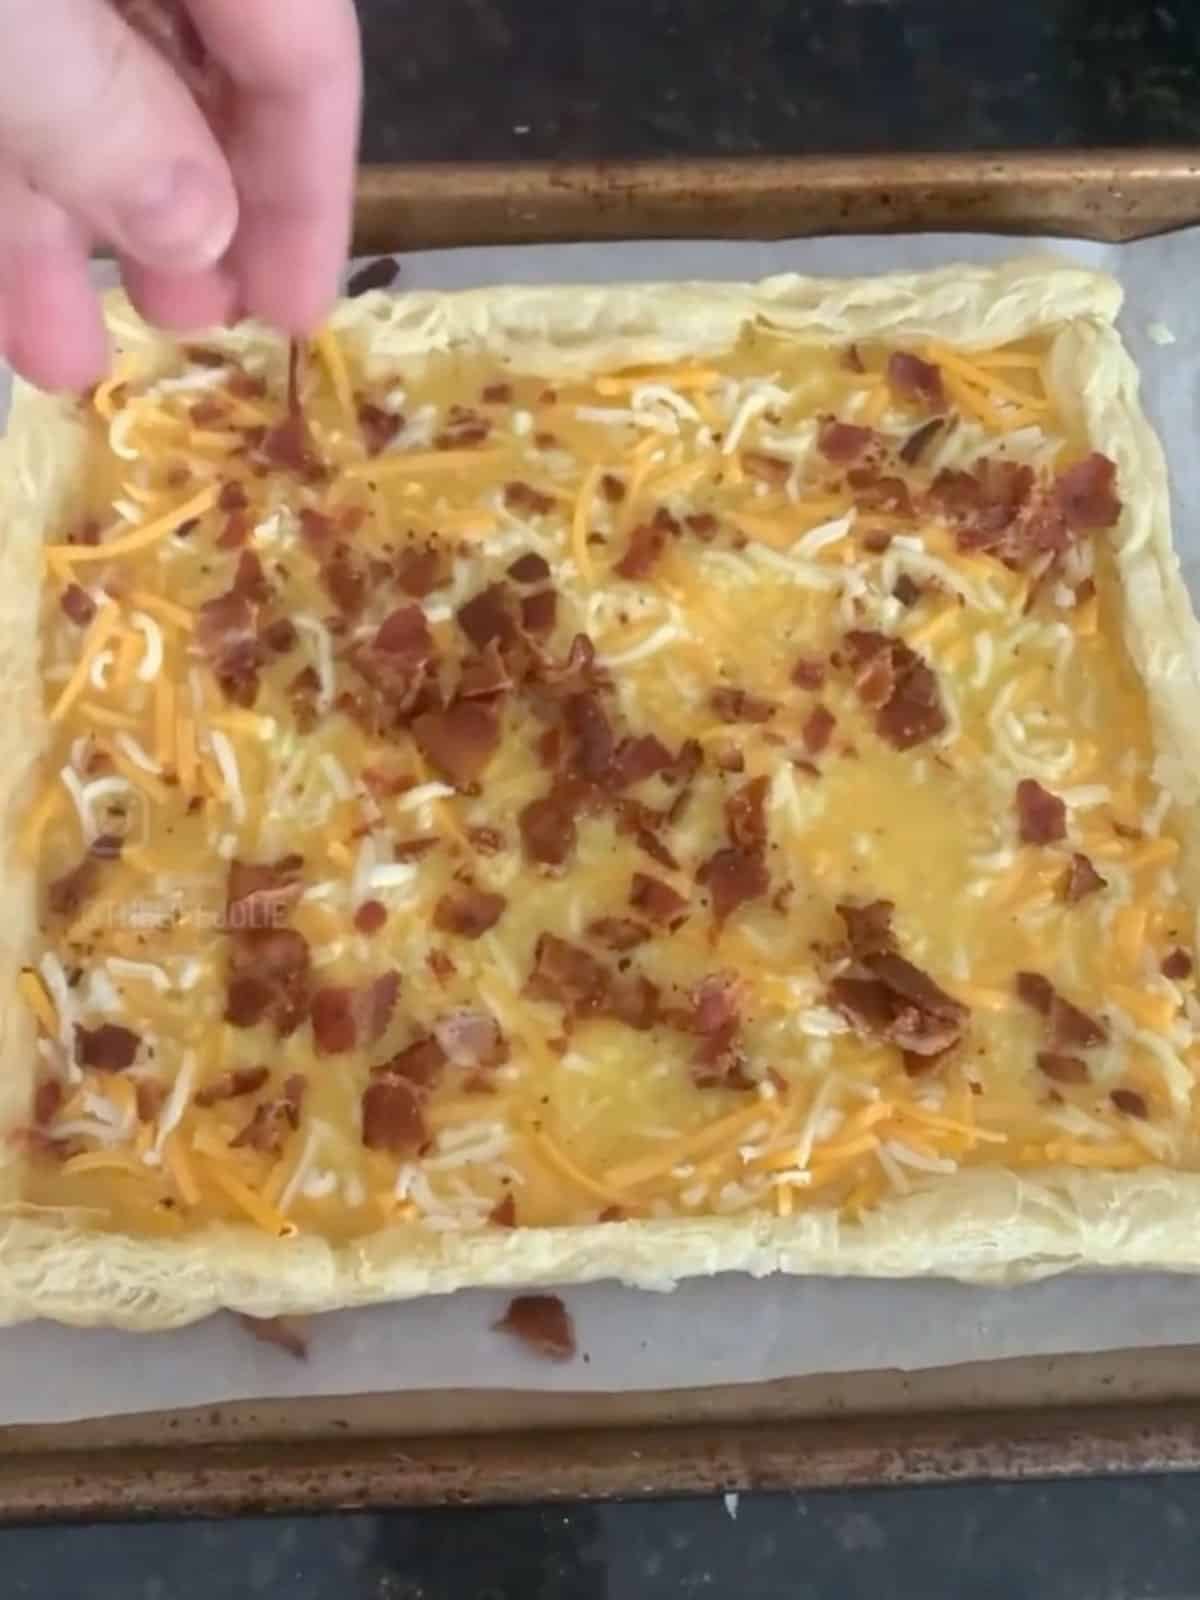 Bacon being sprinkle onto the egg mixture in the puff pastry crust.